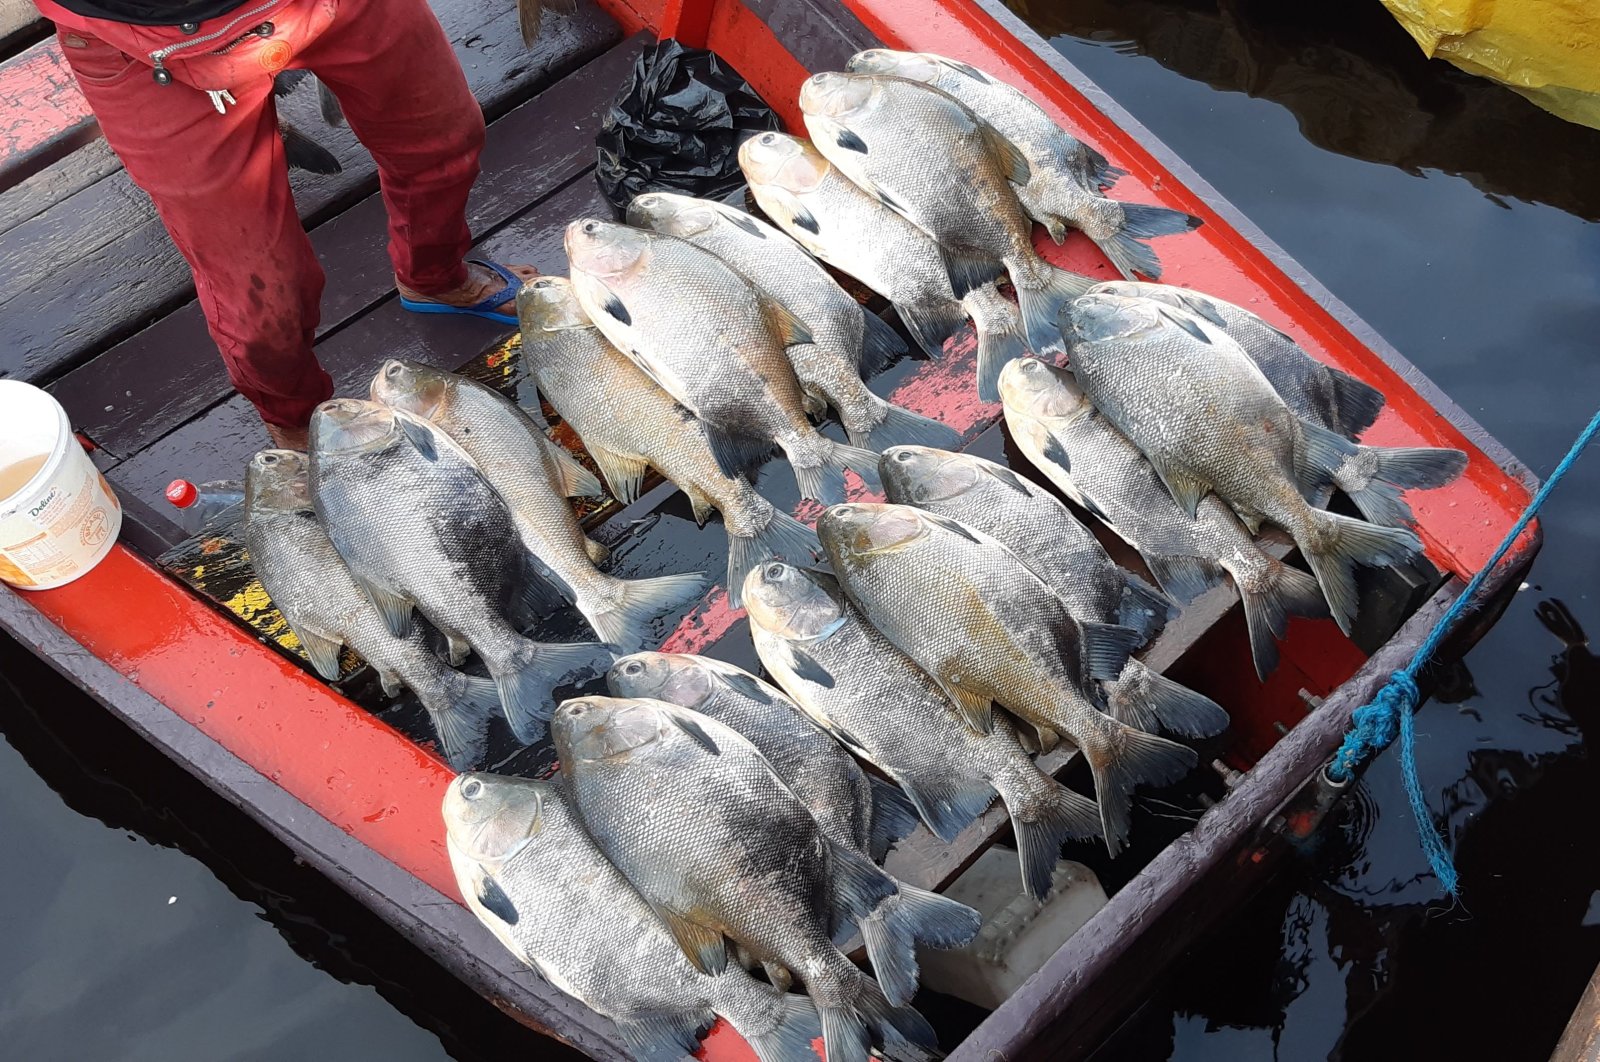 Fish on display at the edge of the city of Manaus, Brazil, caught in the Amazon River, July 25, 2020. (Shutterstock Photo)